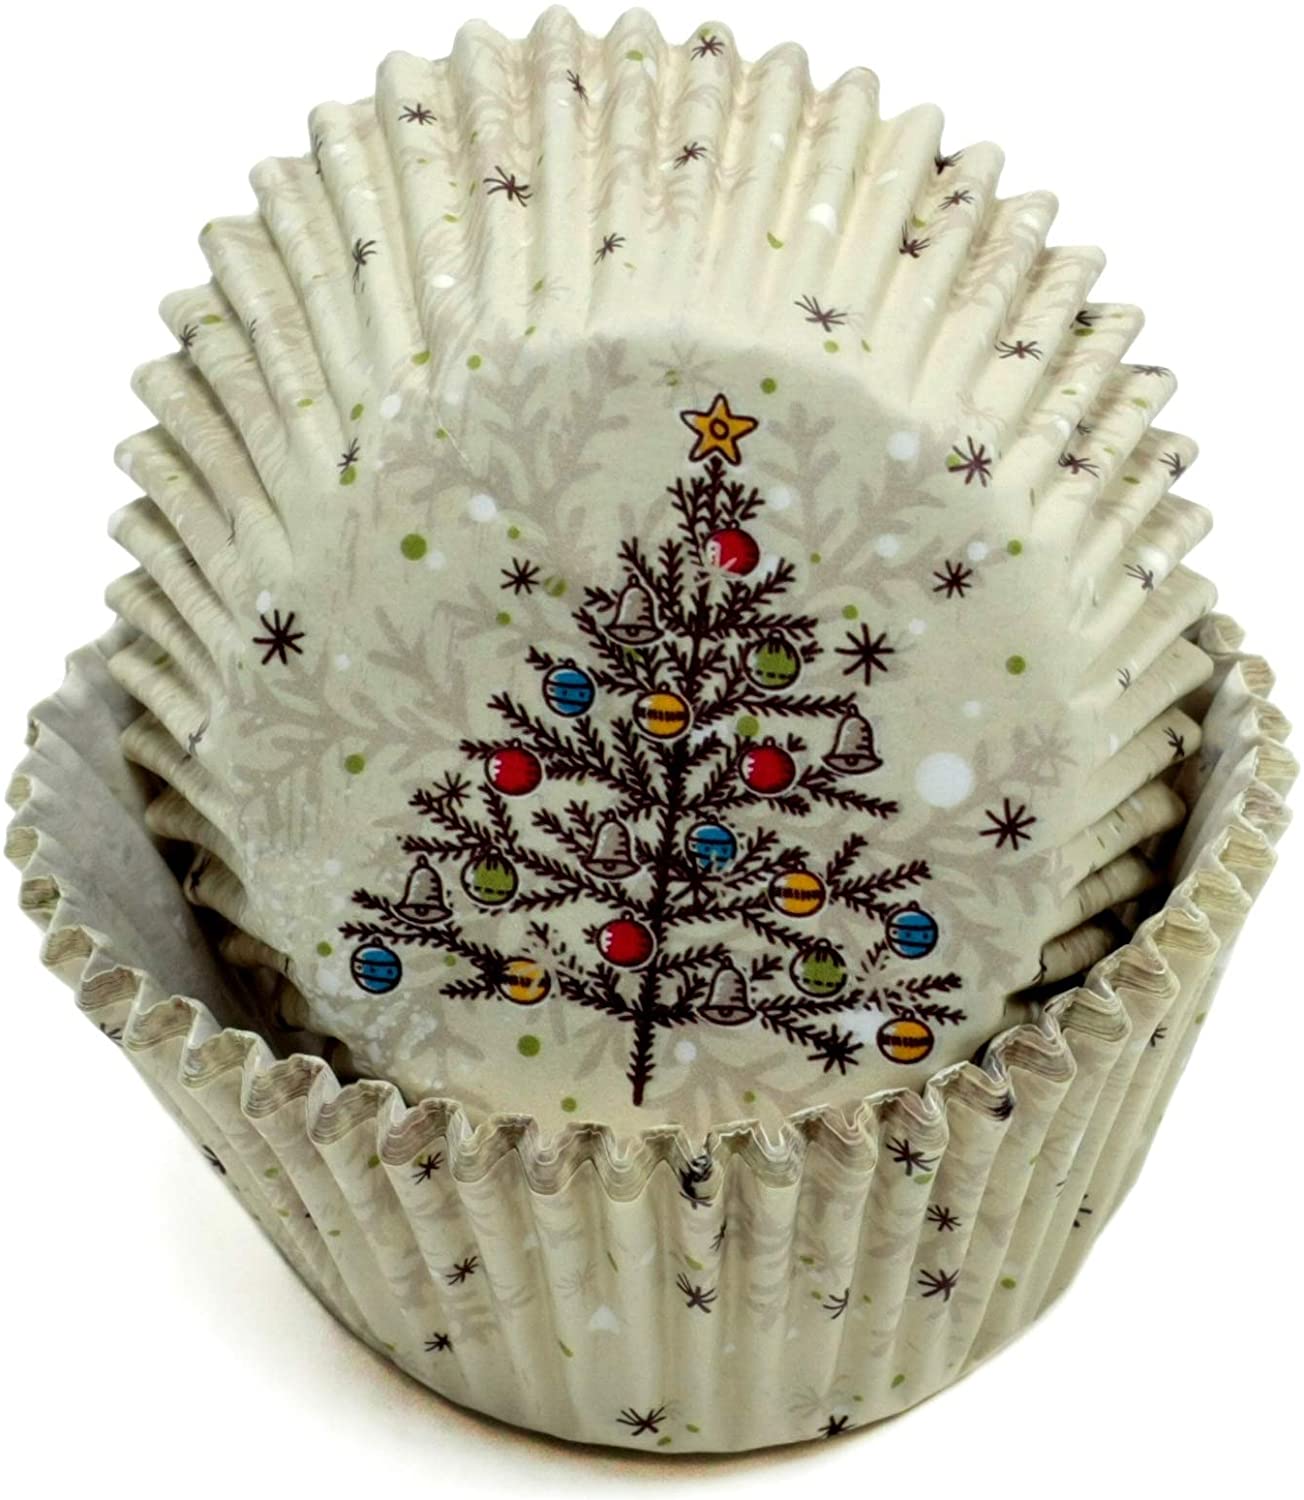 ''Chef CRAFT 50 Count Cupcake Liners, Tree with Decor''